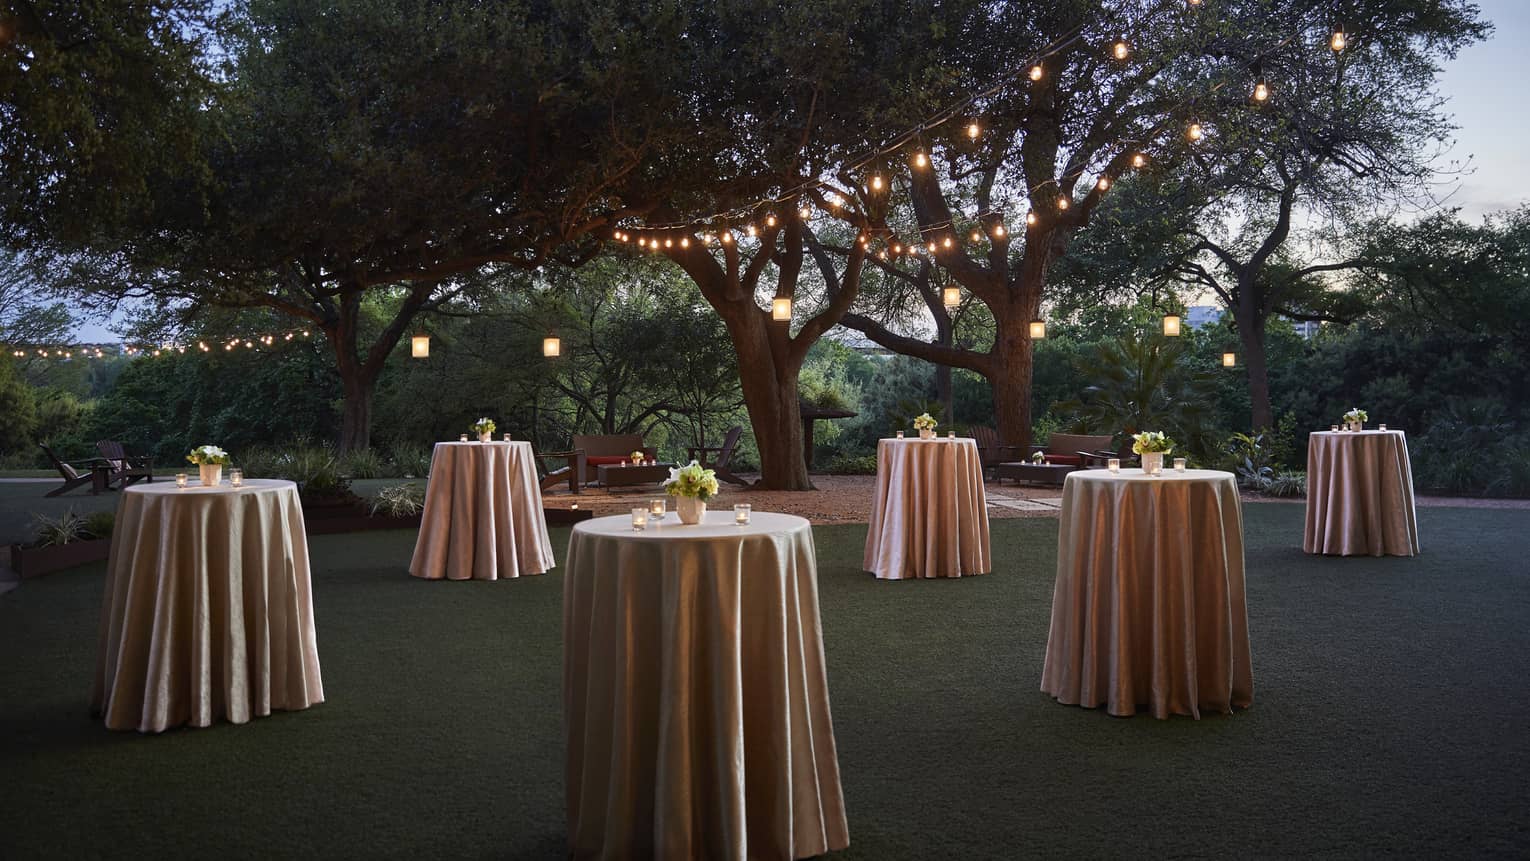 Small cocktail tables with silk linens across event lawn at night